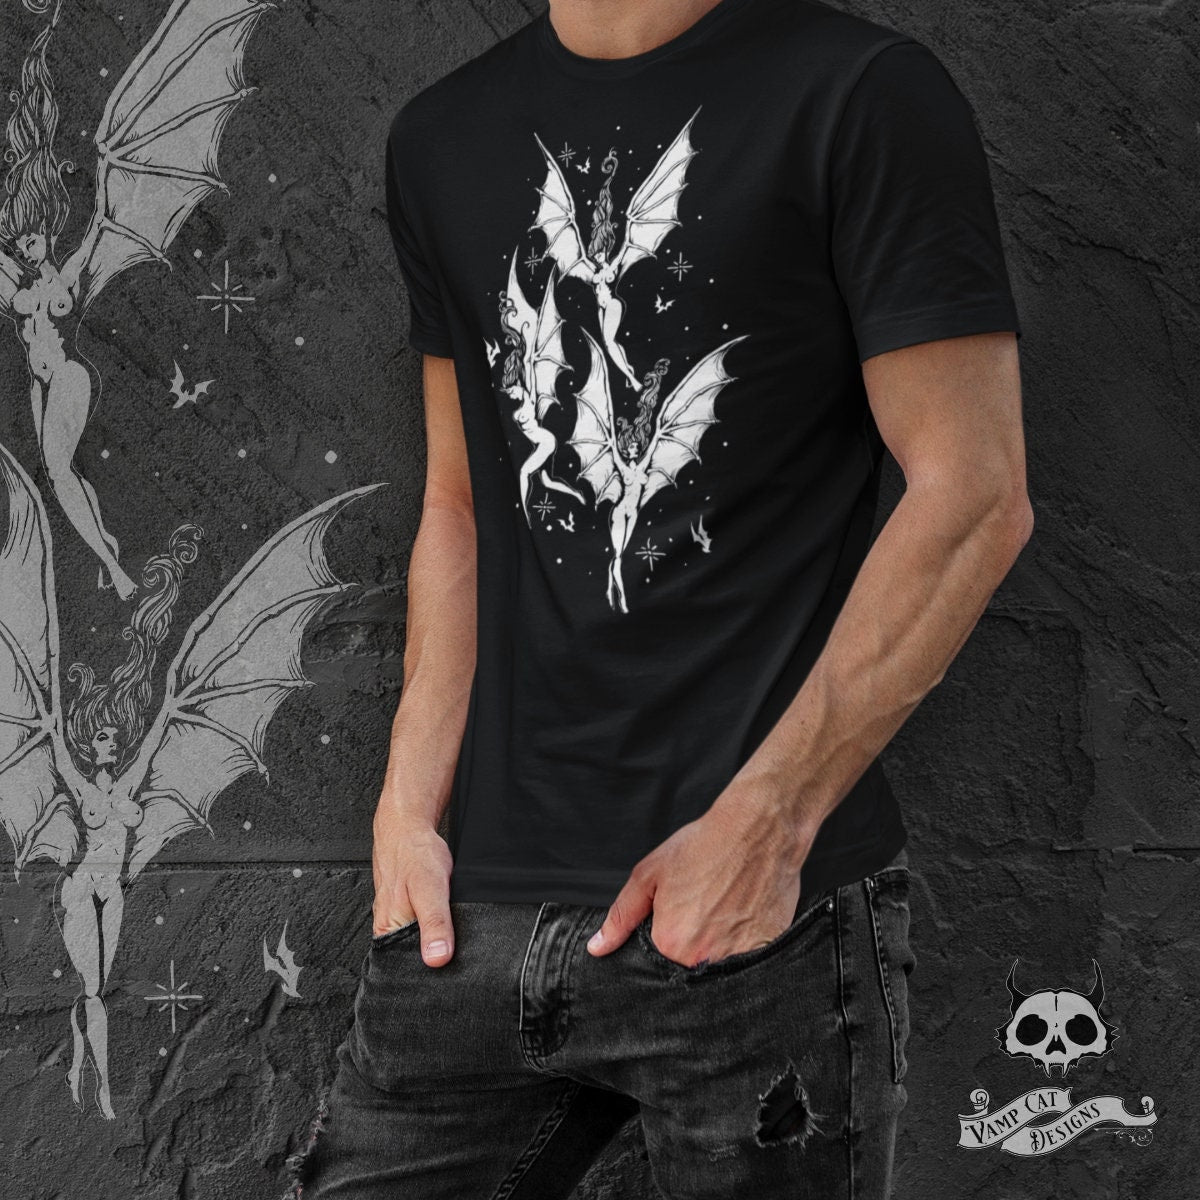 Flight Of The Succubus-Unisex Jersey Tee-Dark Art Apparel-Folklore Art-Men and Women-Gothic Clothing-Witchy-Female Demons